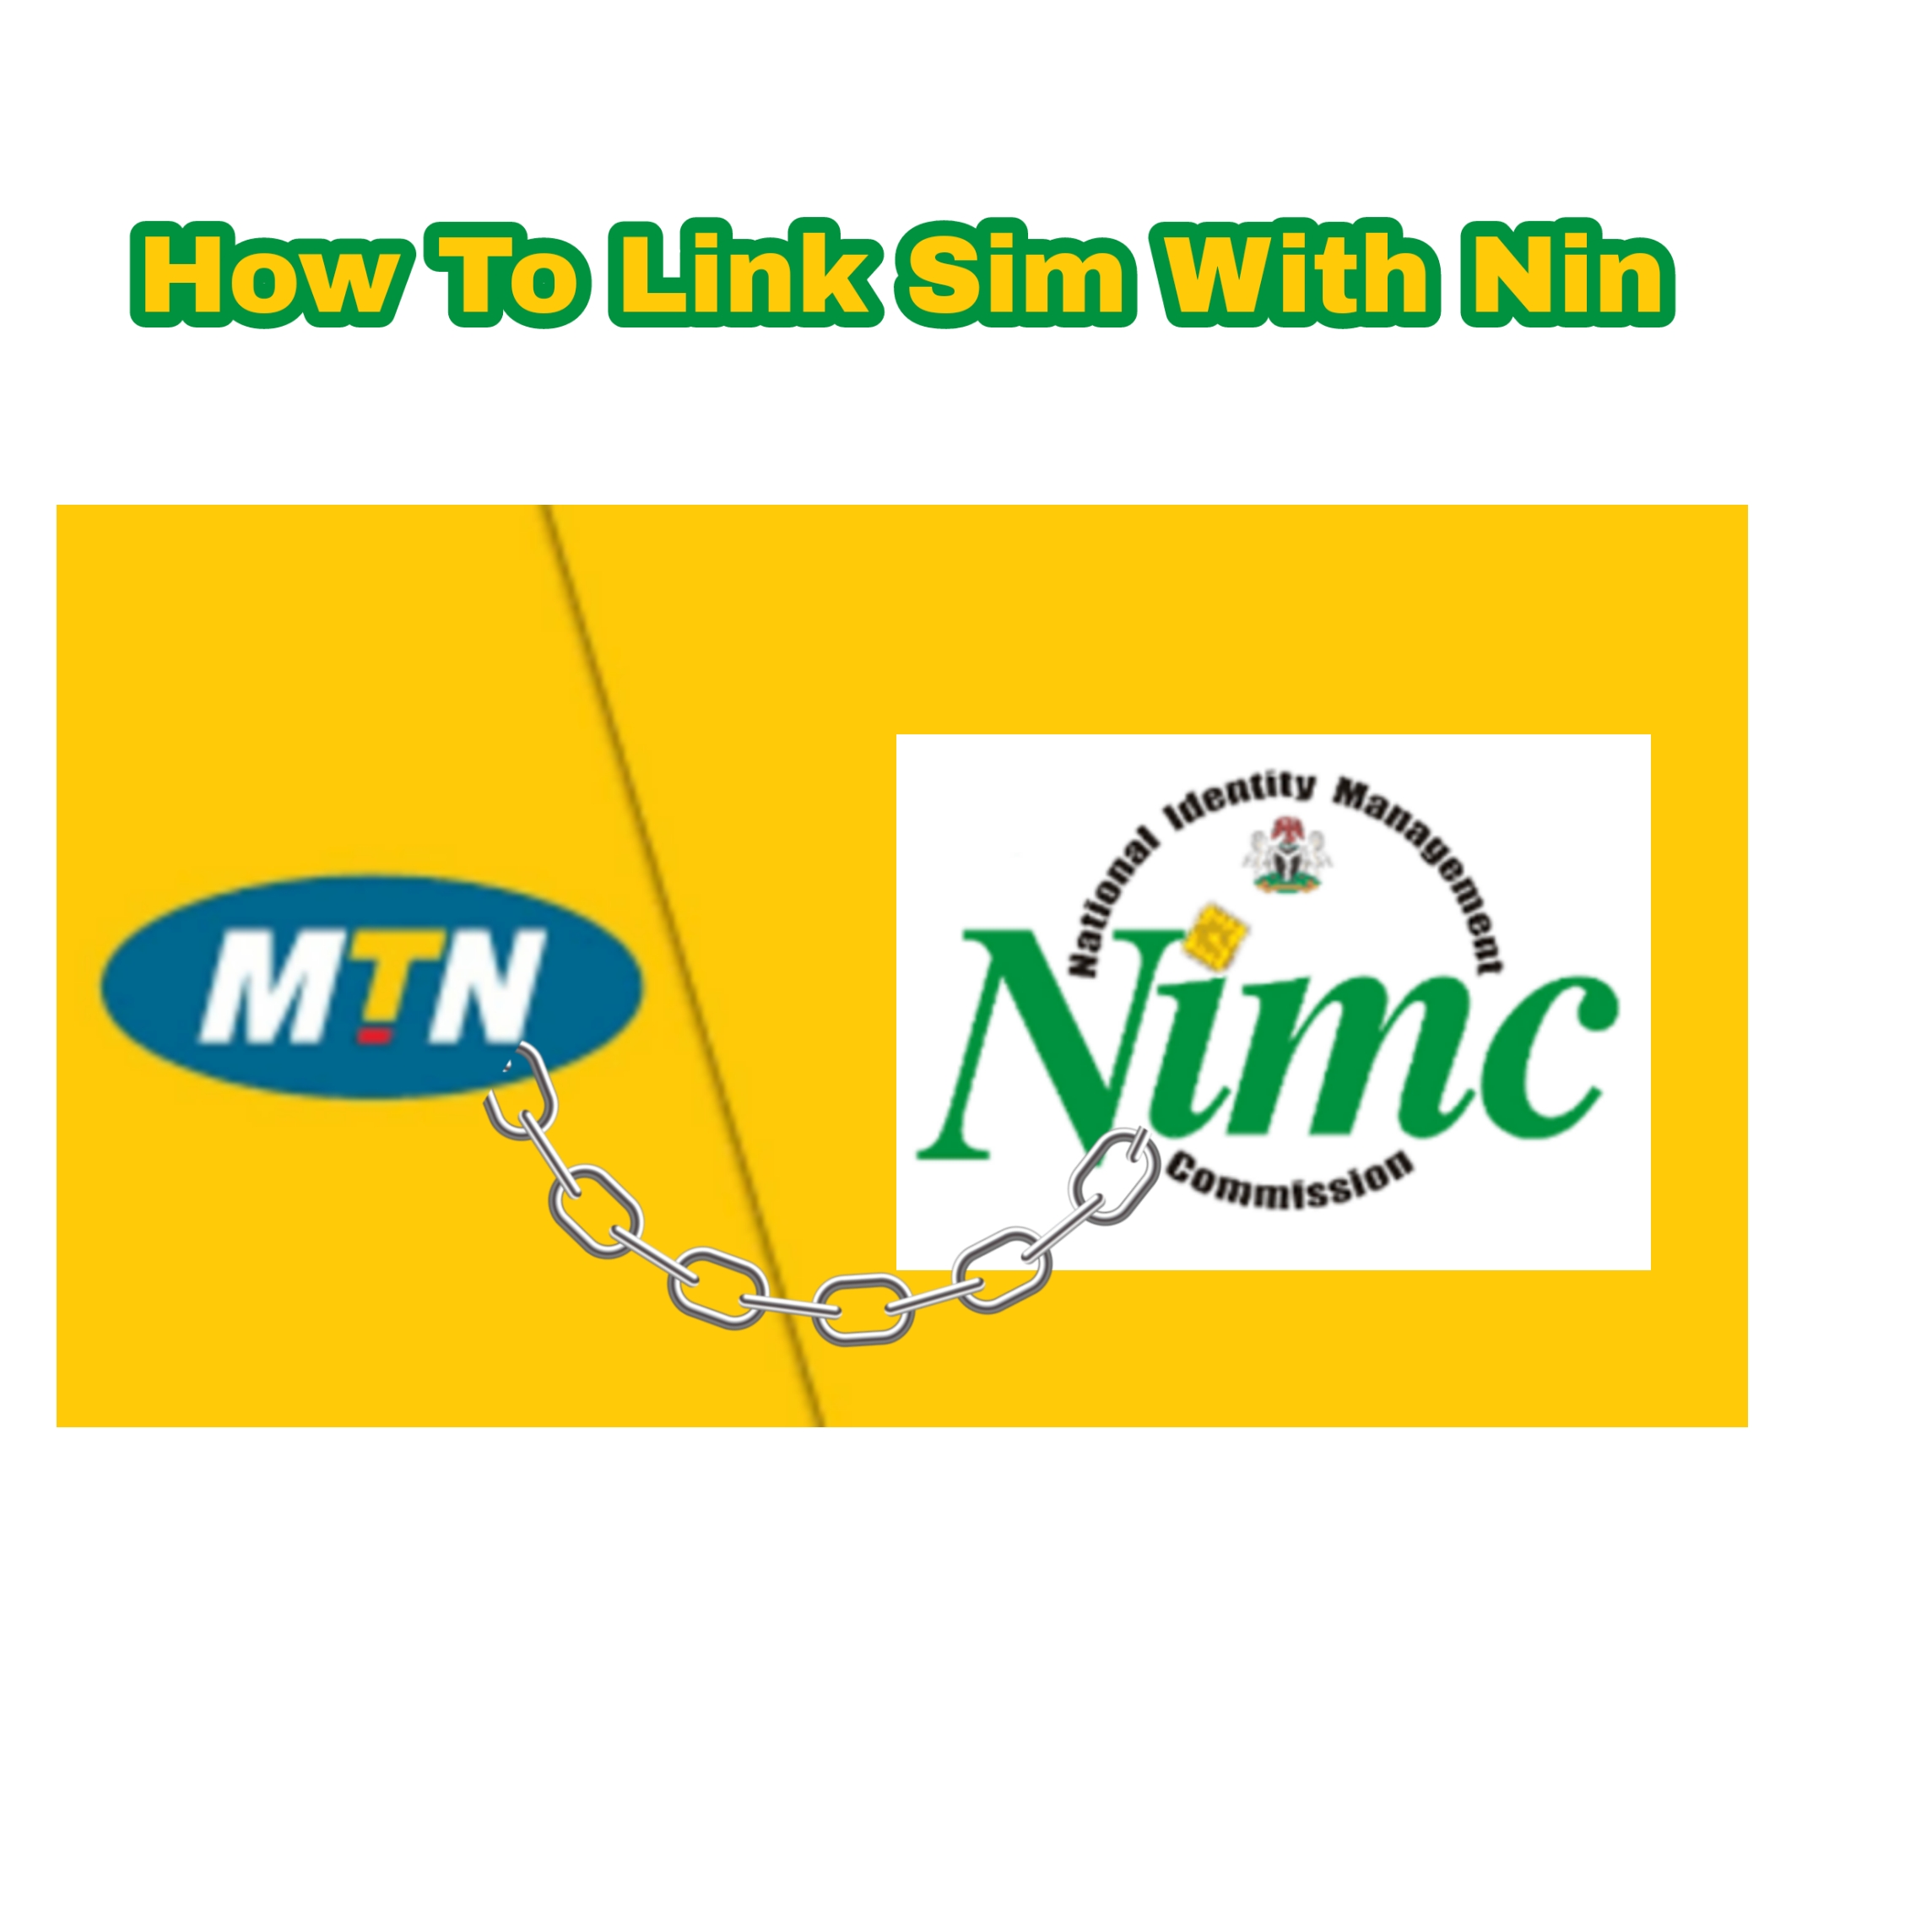 How To Link NIN To Mtn In 2023